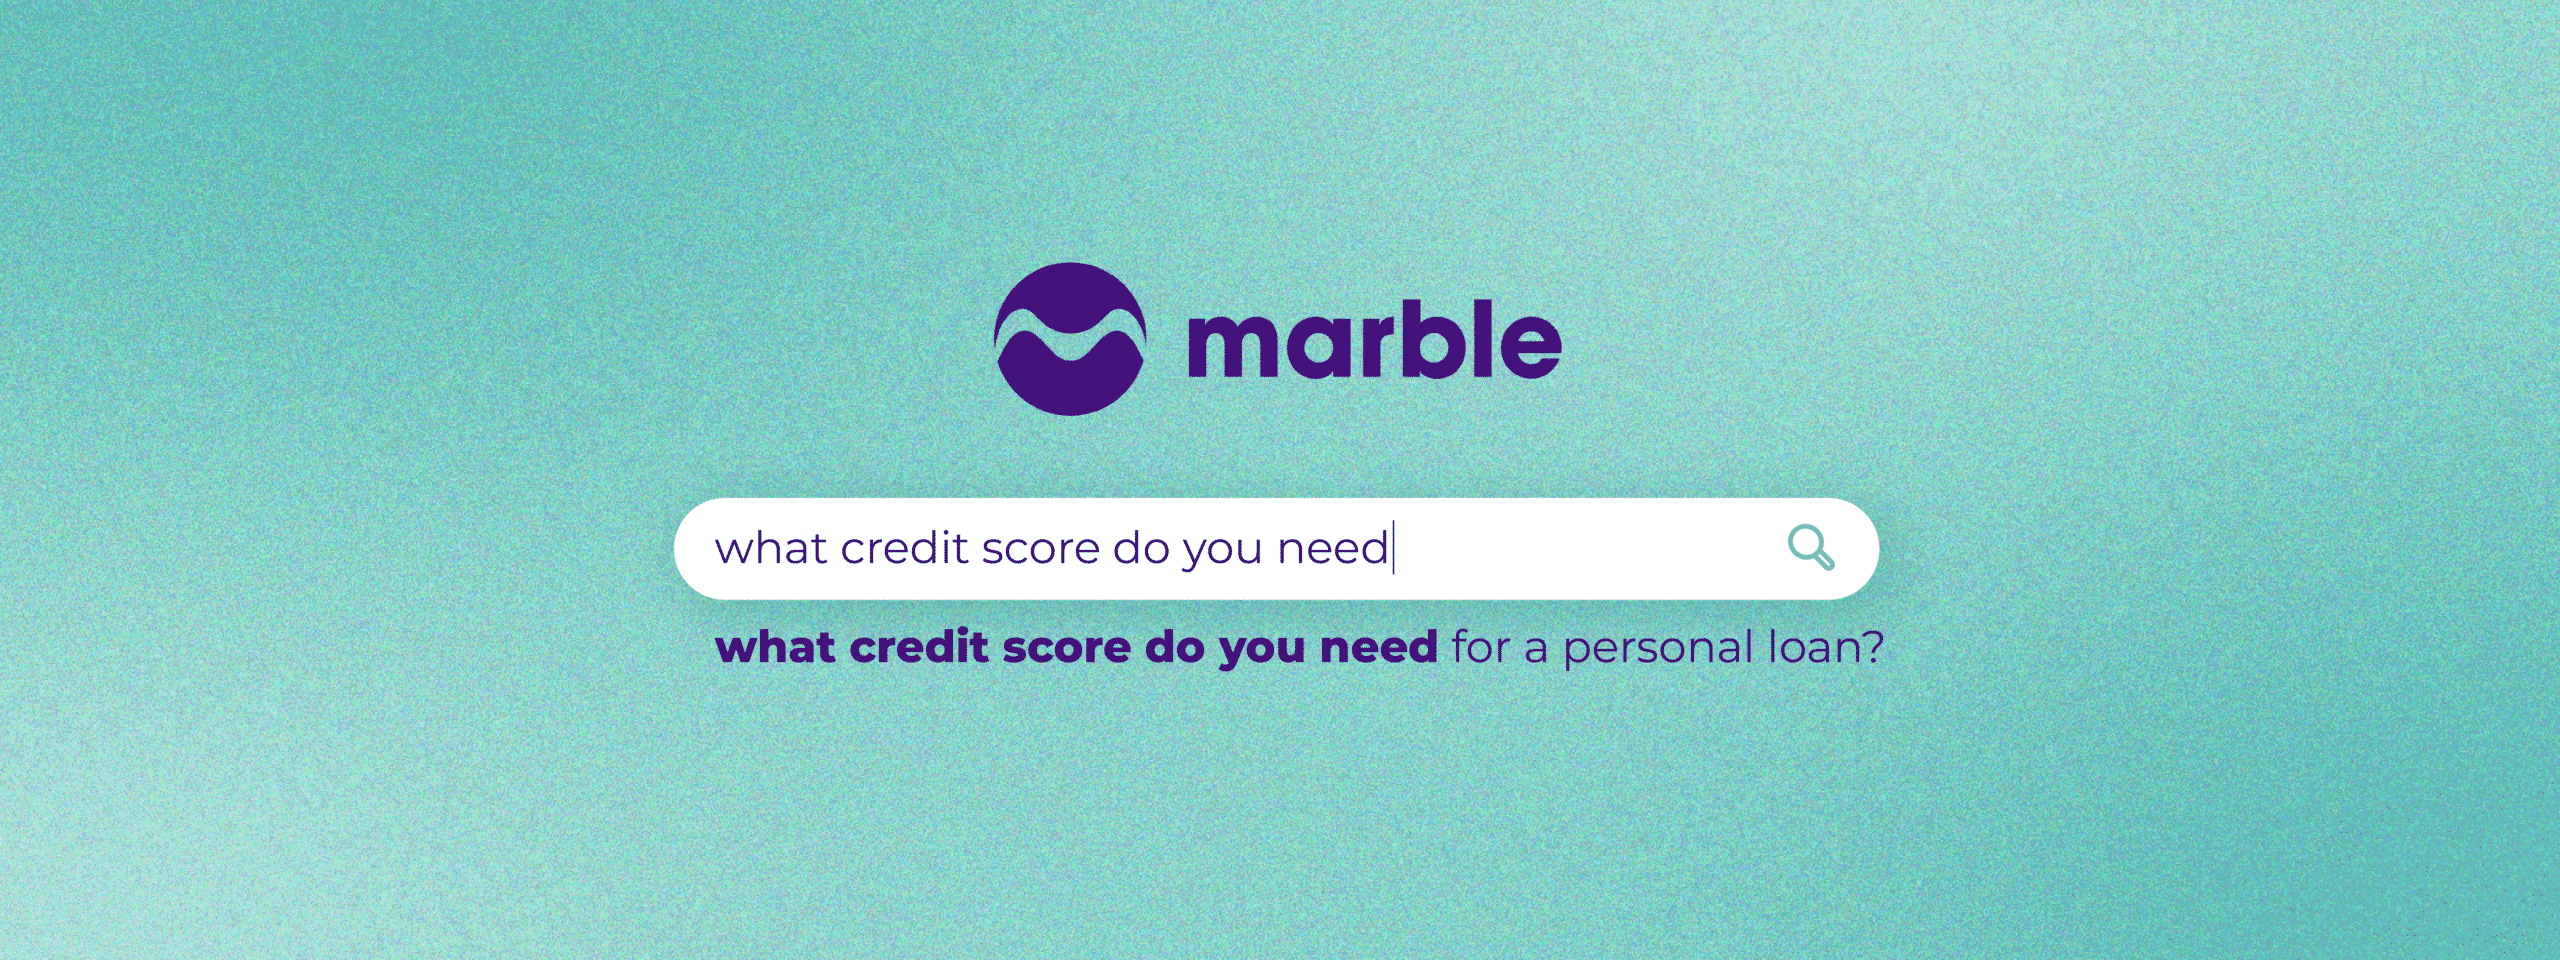 Credit score for personal loan